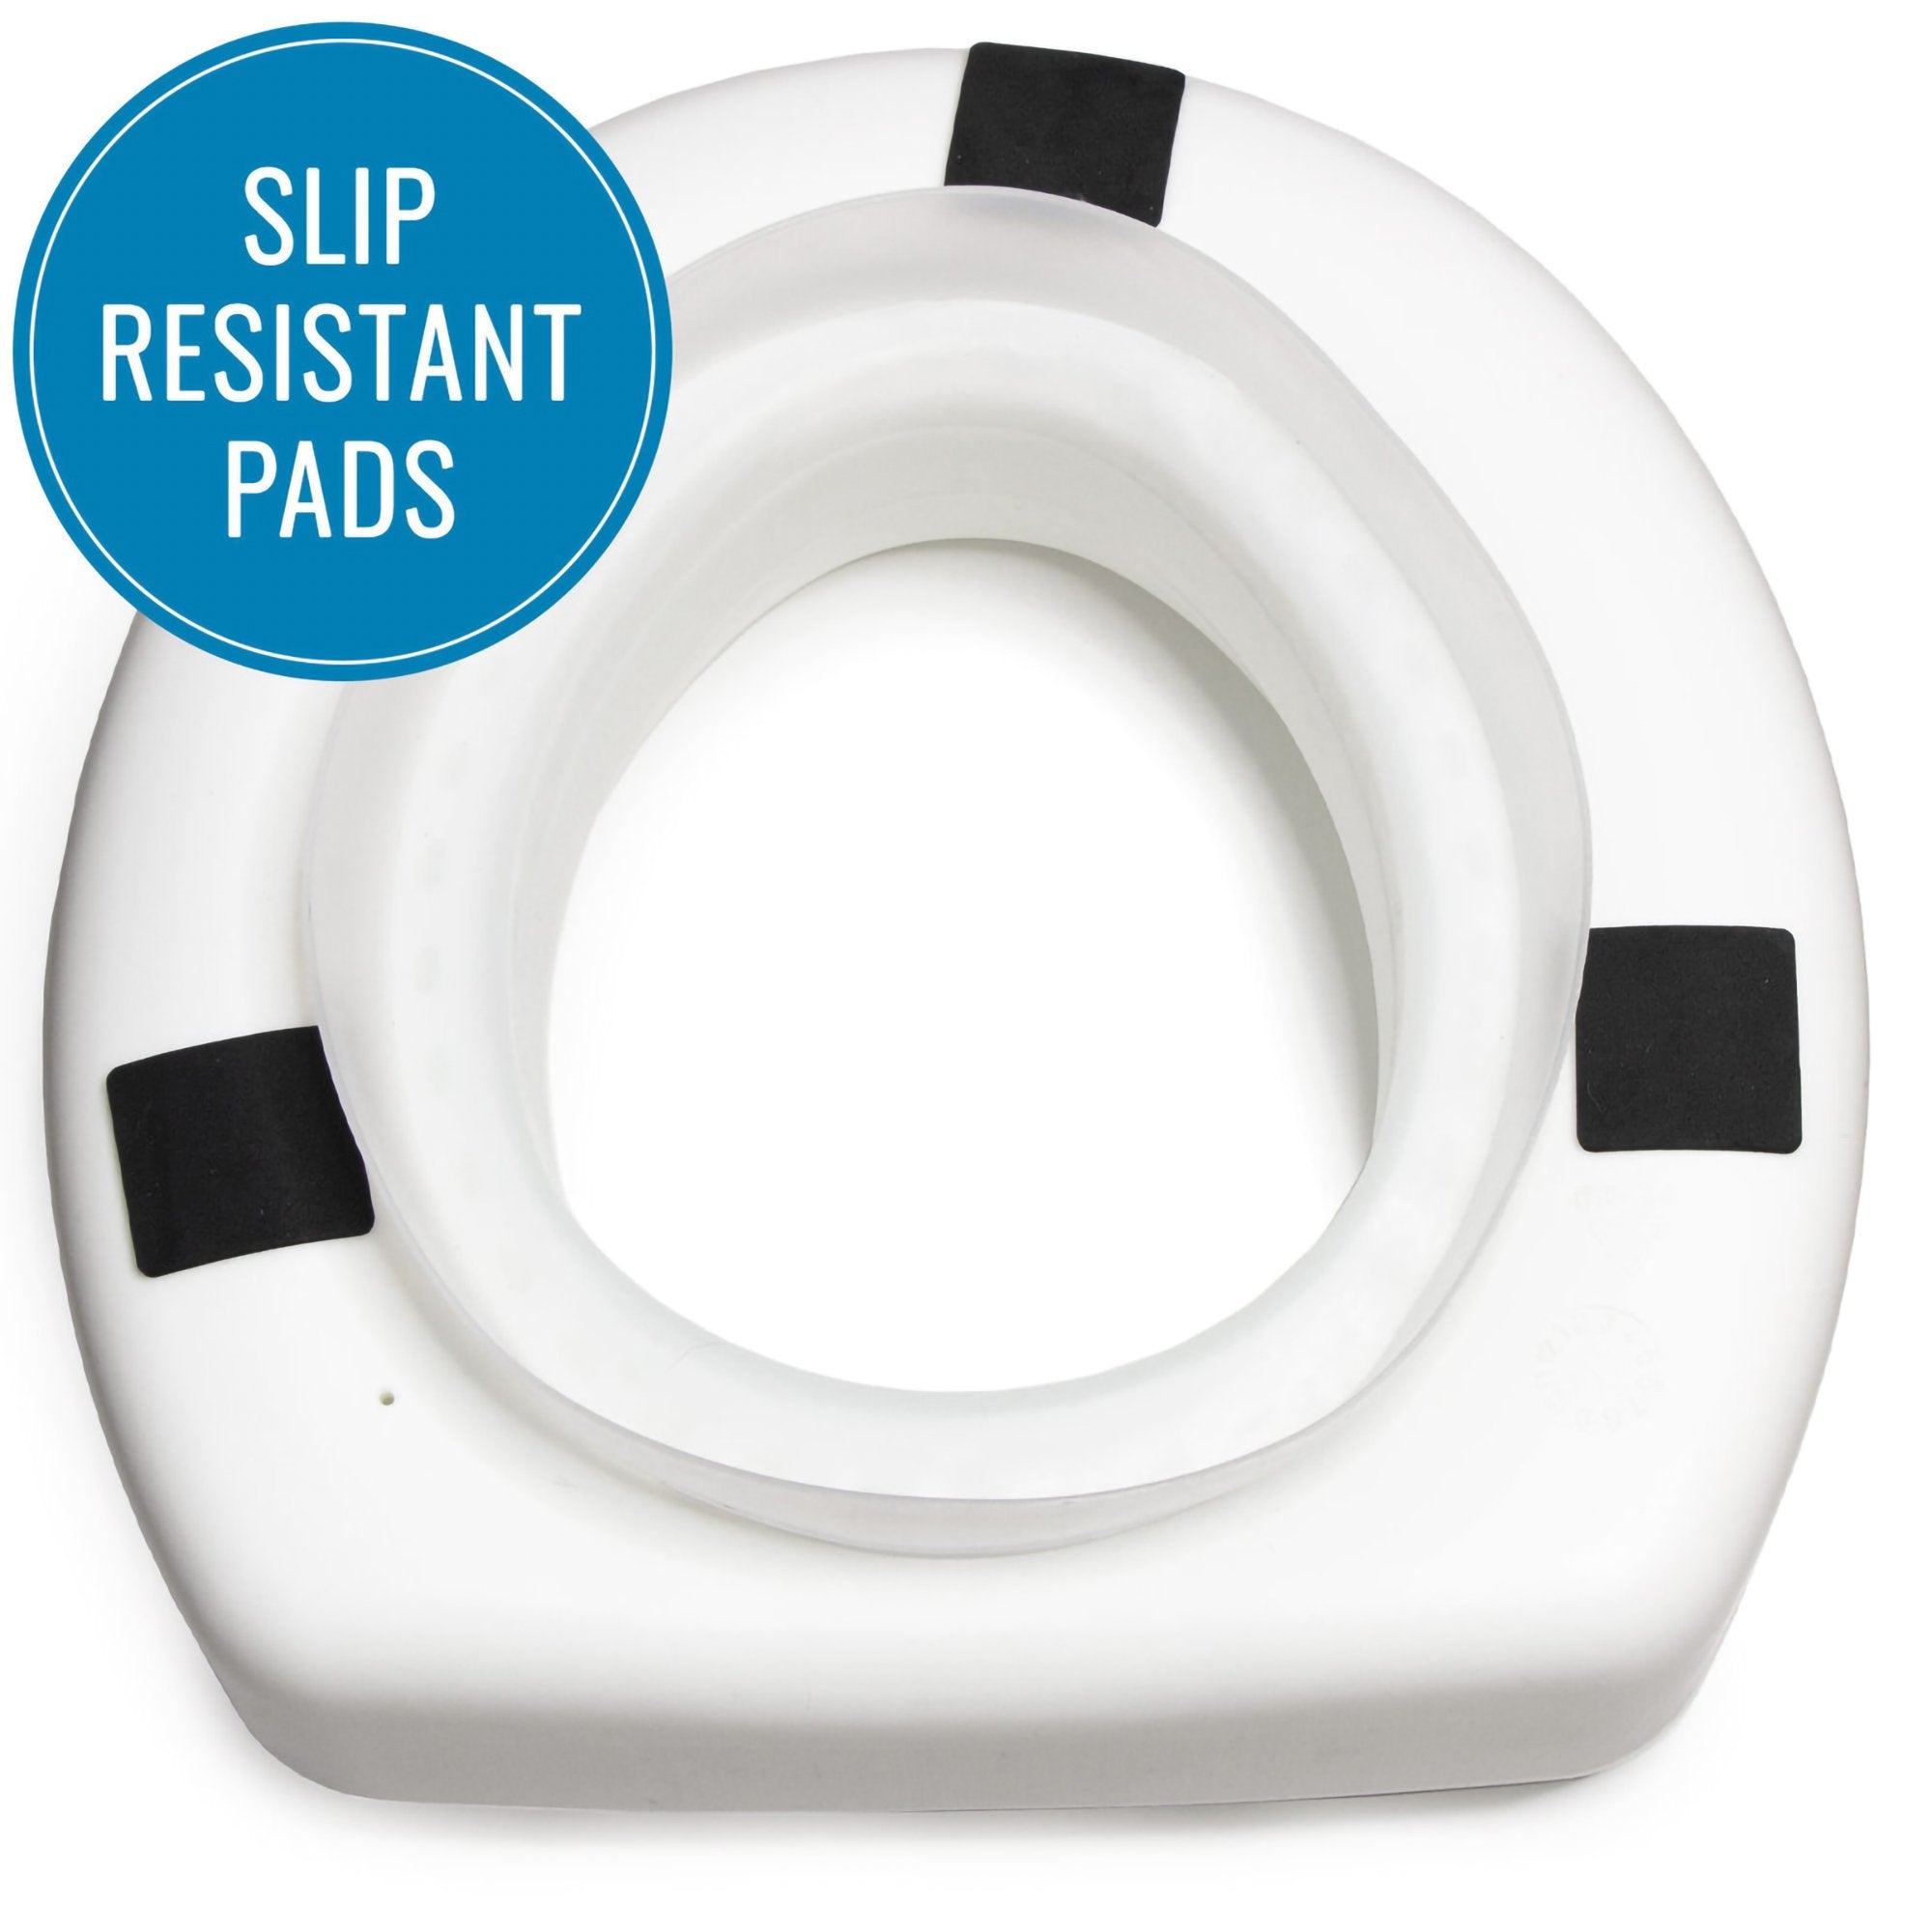 Raised Toilet Seat HealthSmart 5 Inch Height White 250 lbs. Weight Capacity.